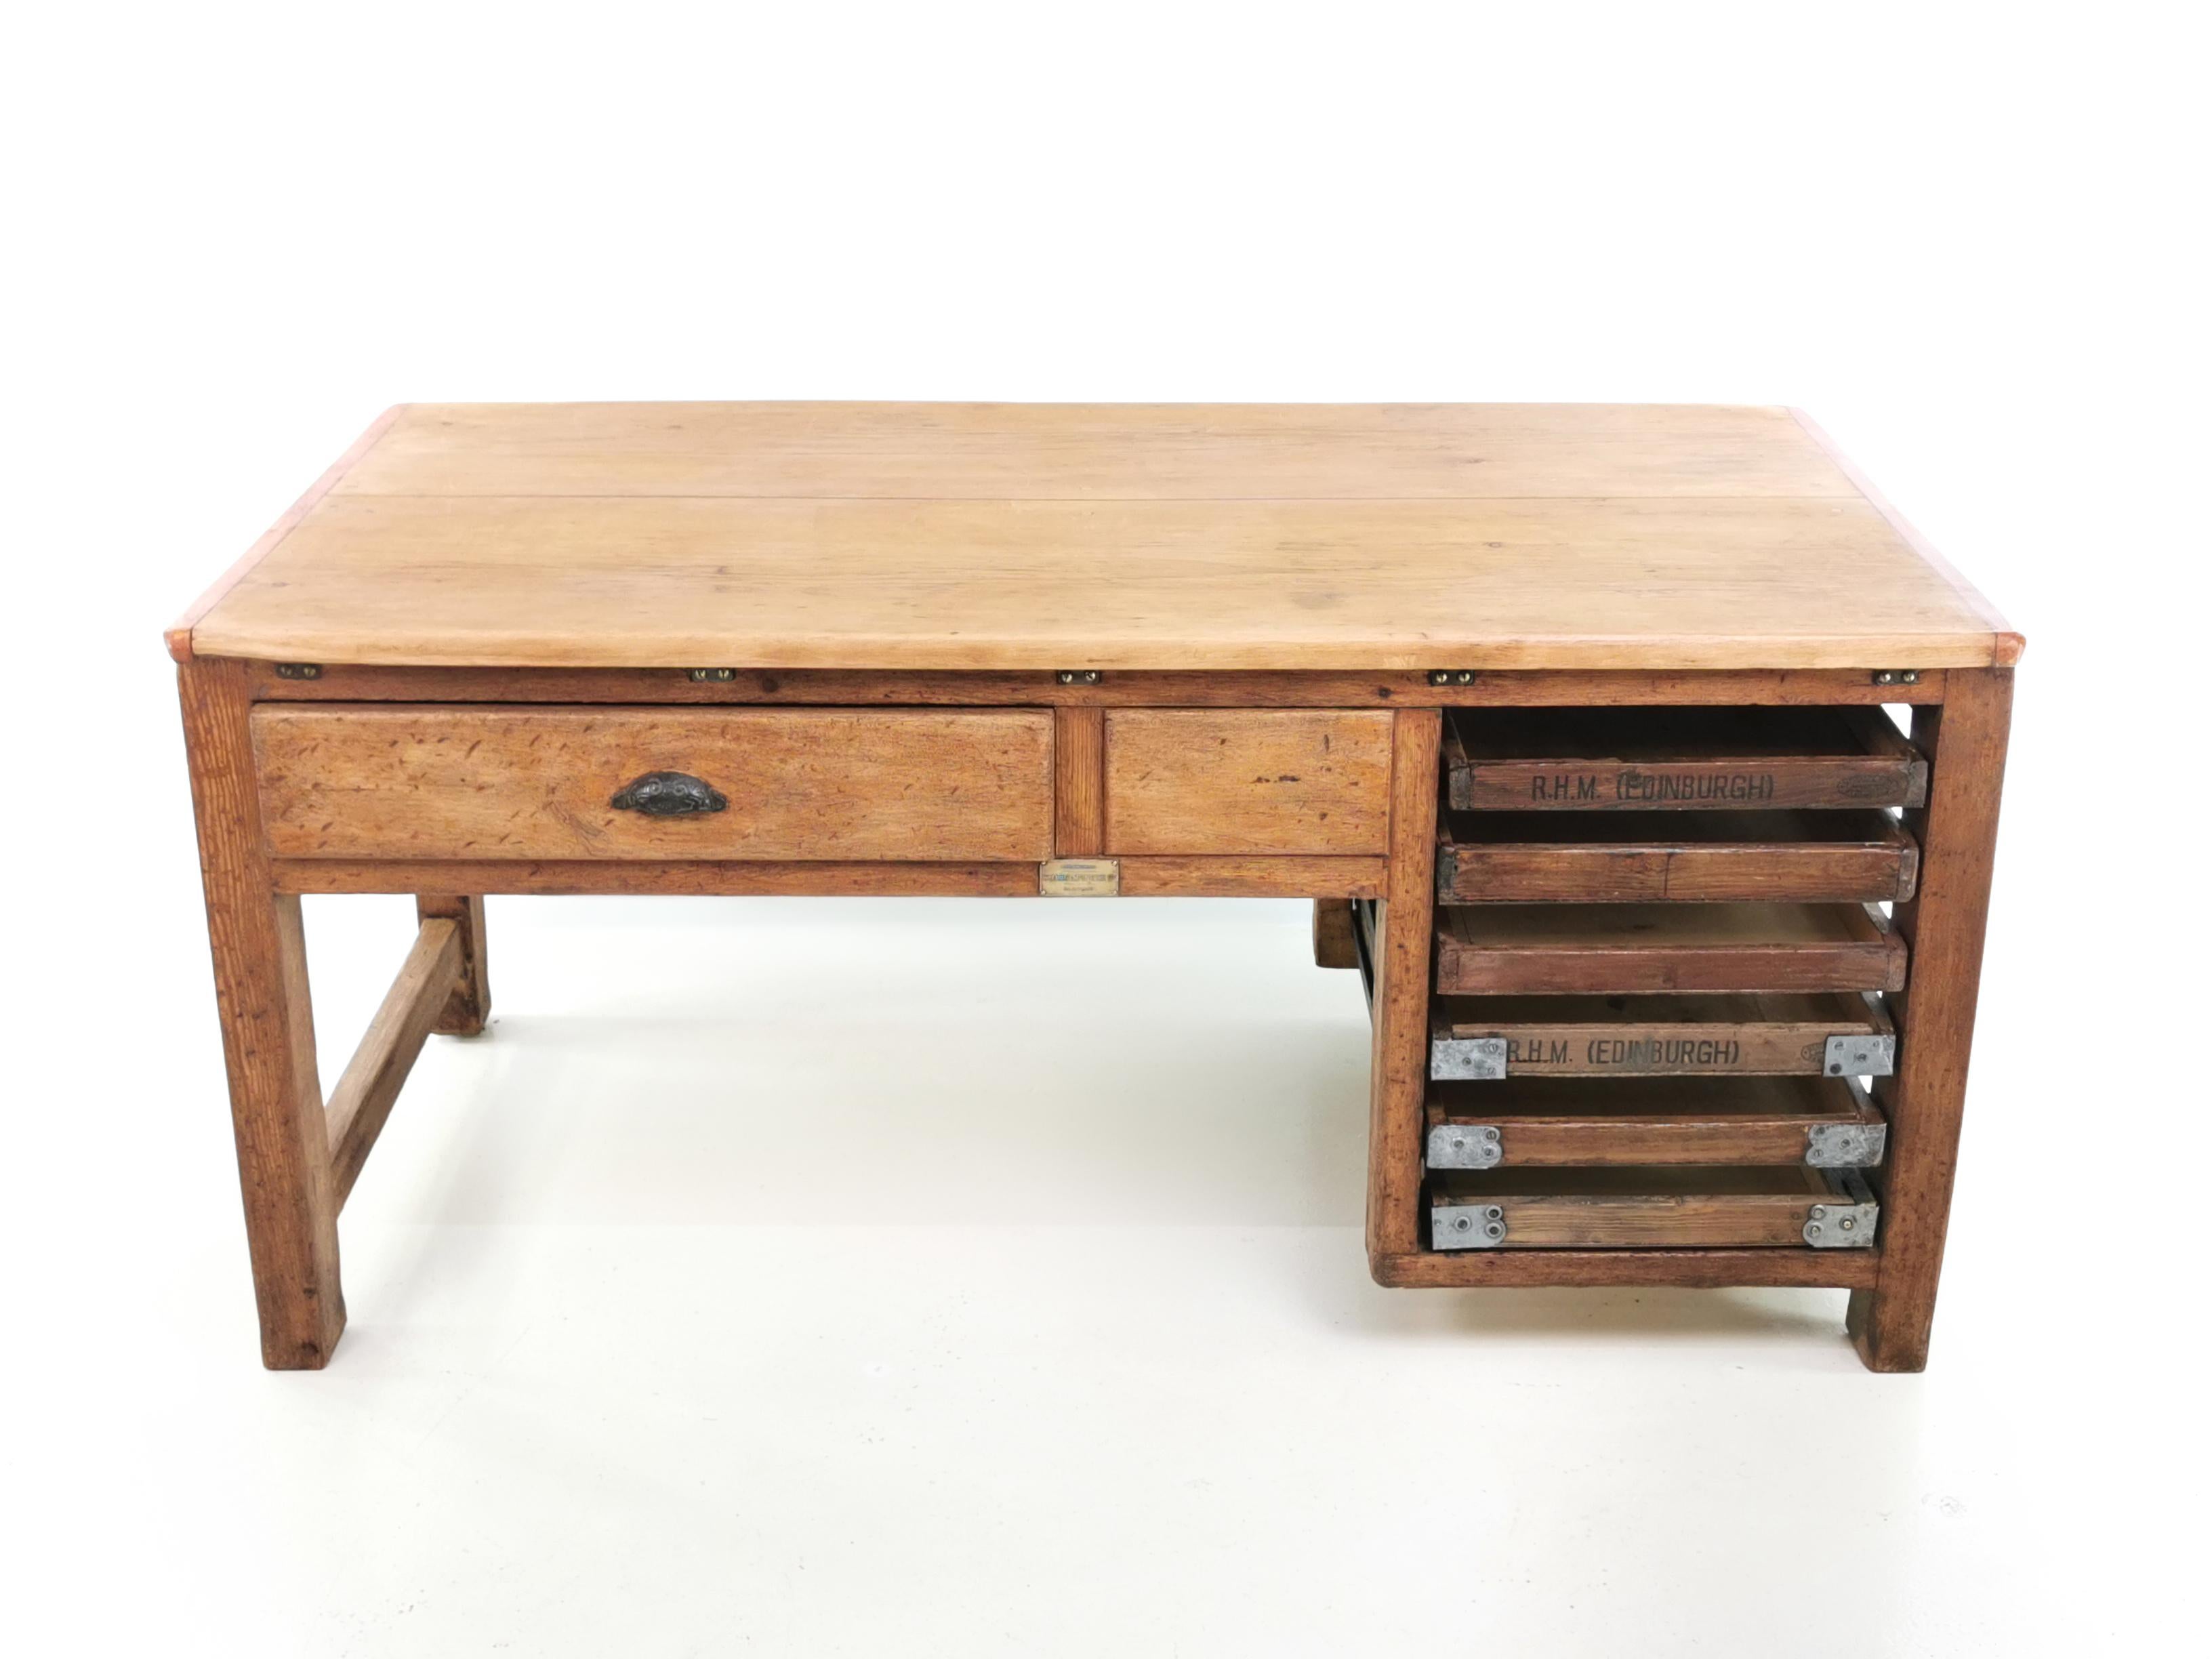 British Early 20th Century Vintage Scottish Bakers Bench Work Table